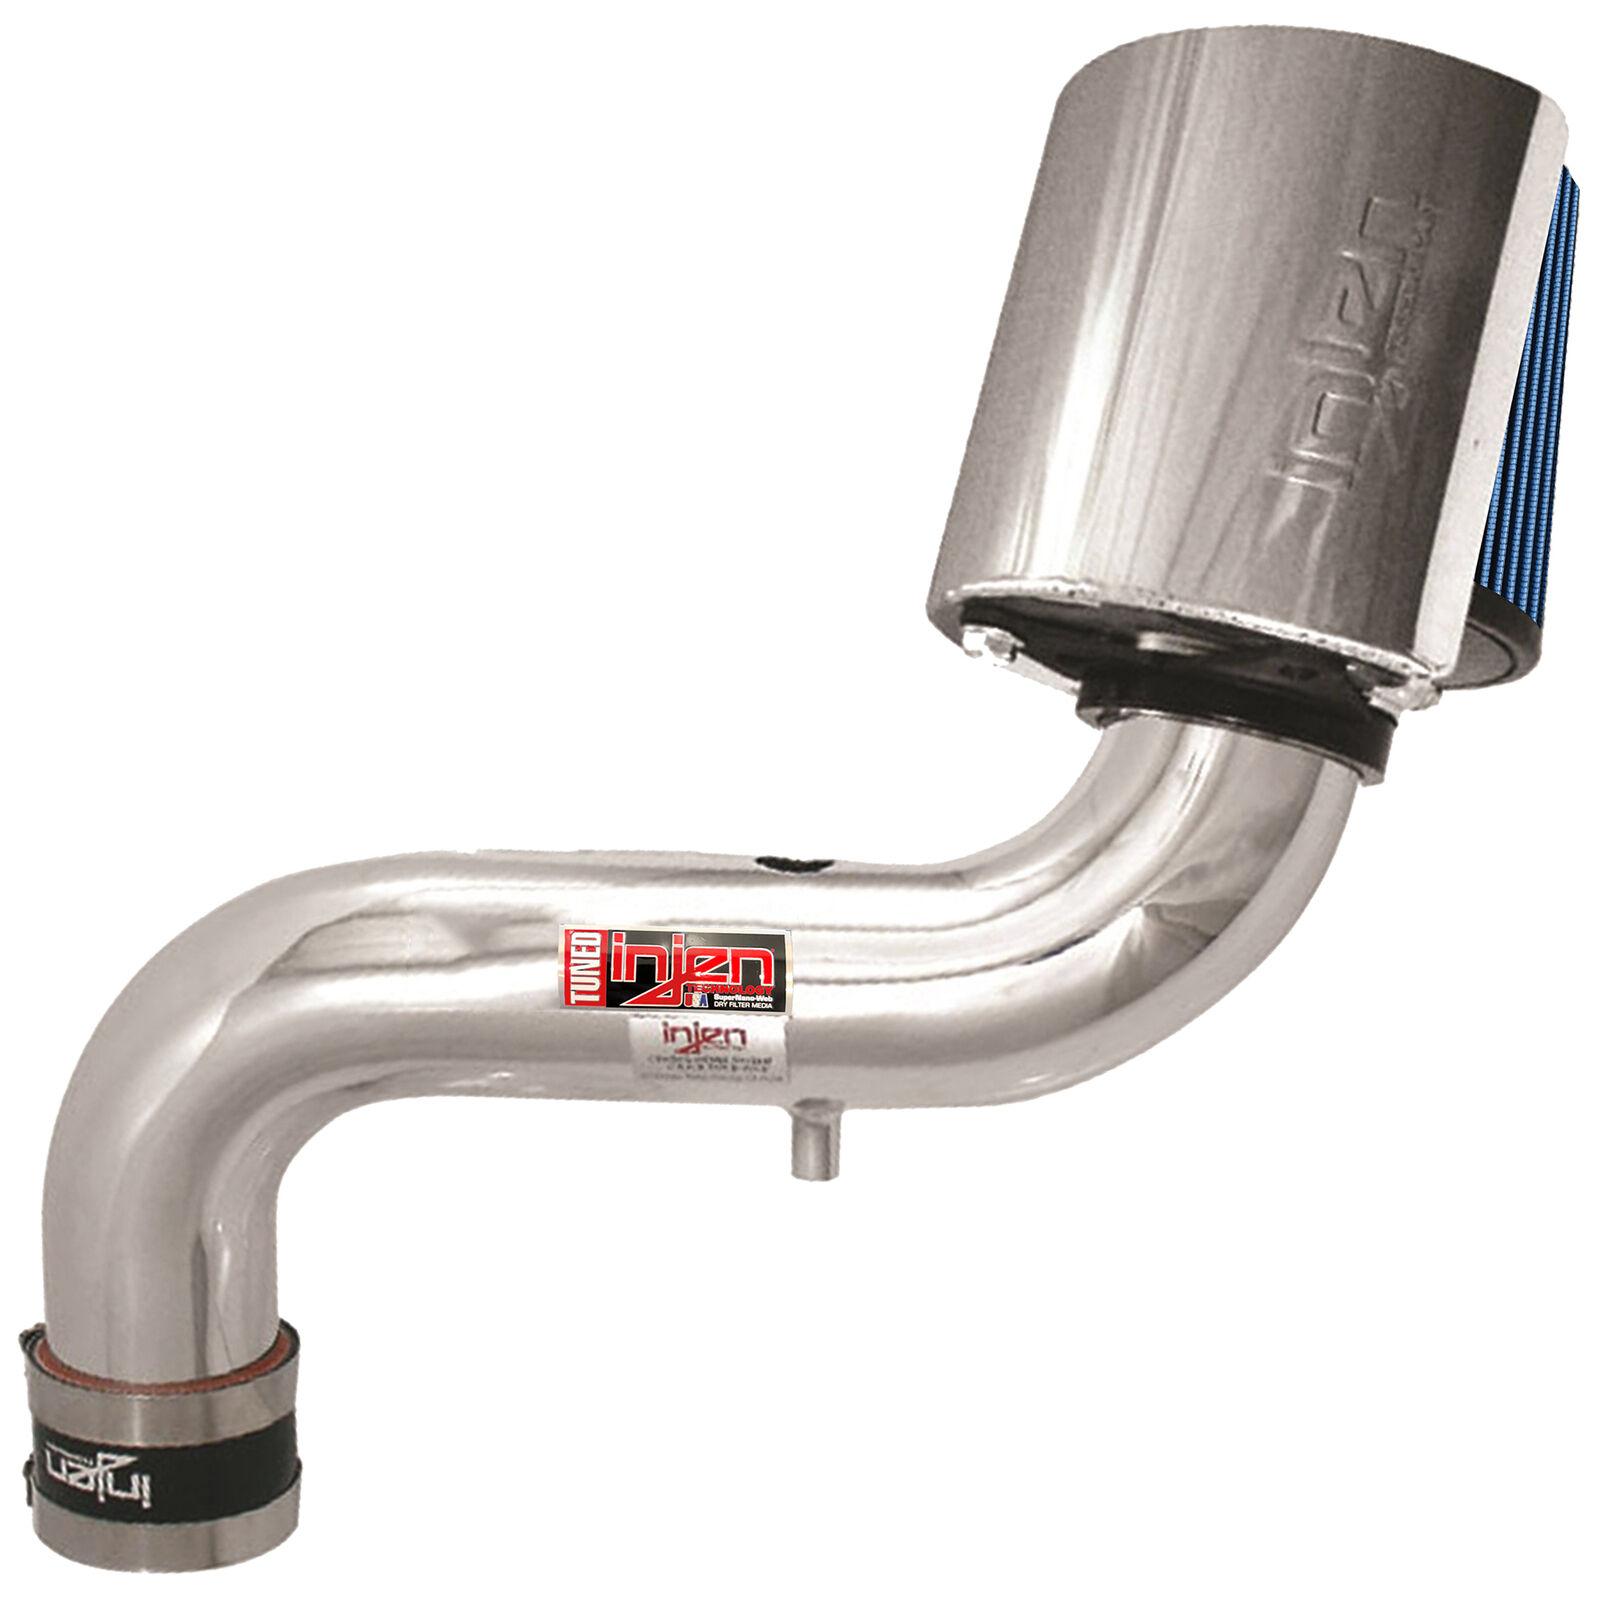 Injen IS2040P Polished Aluminum Cold Air Intake for 94-99 Toyota Celica GT 2.2L